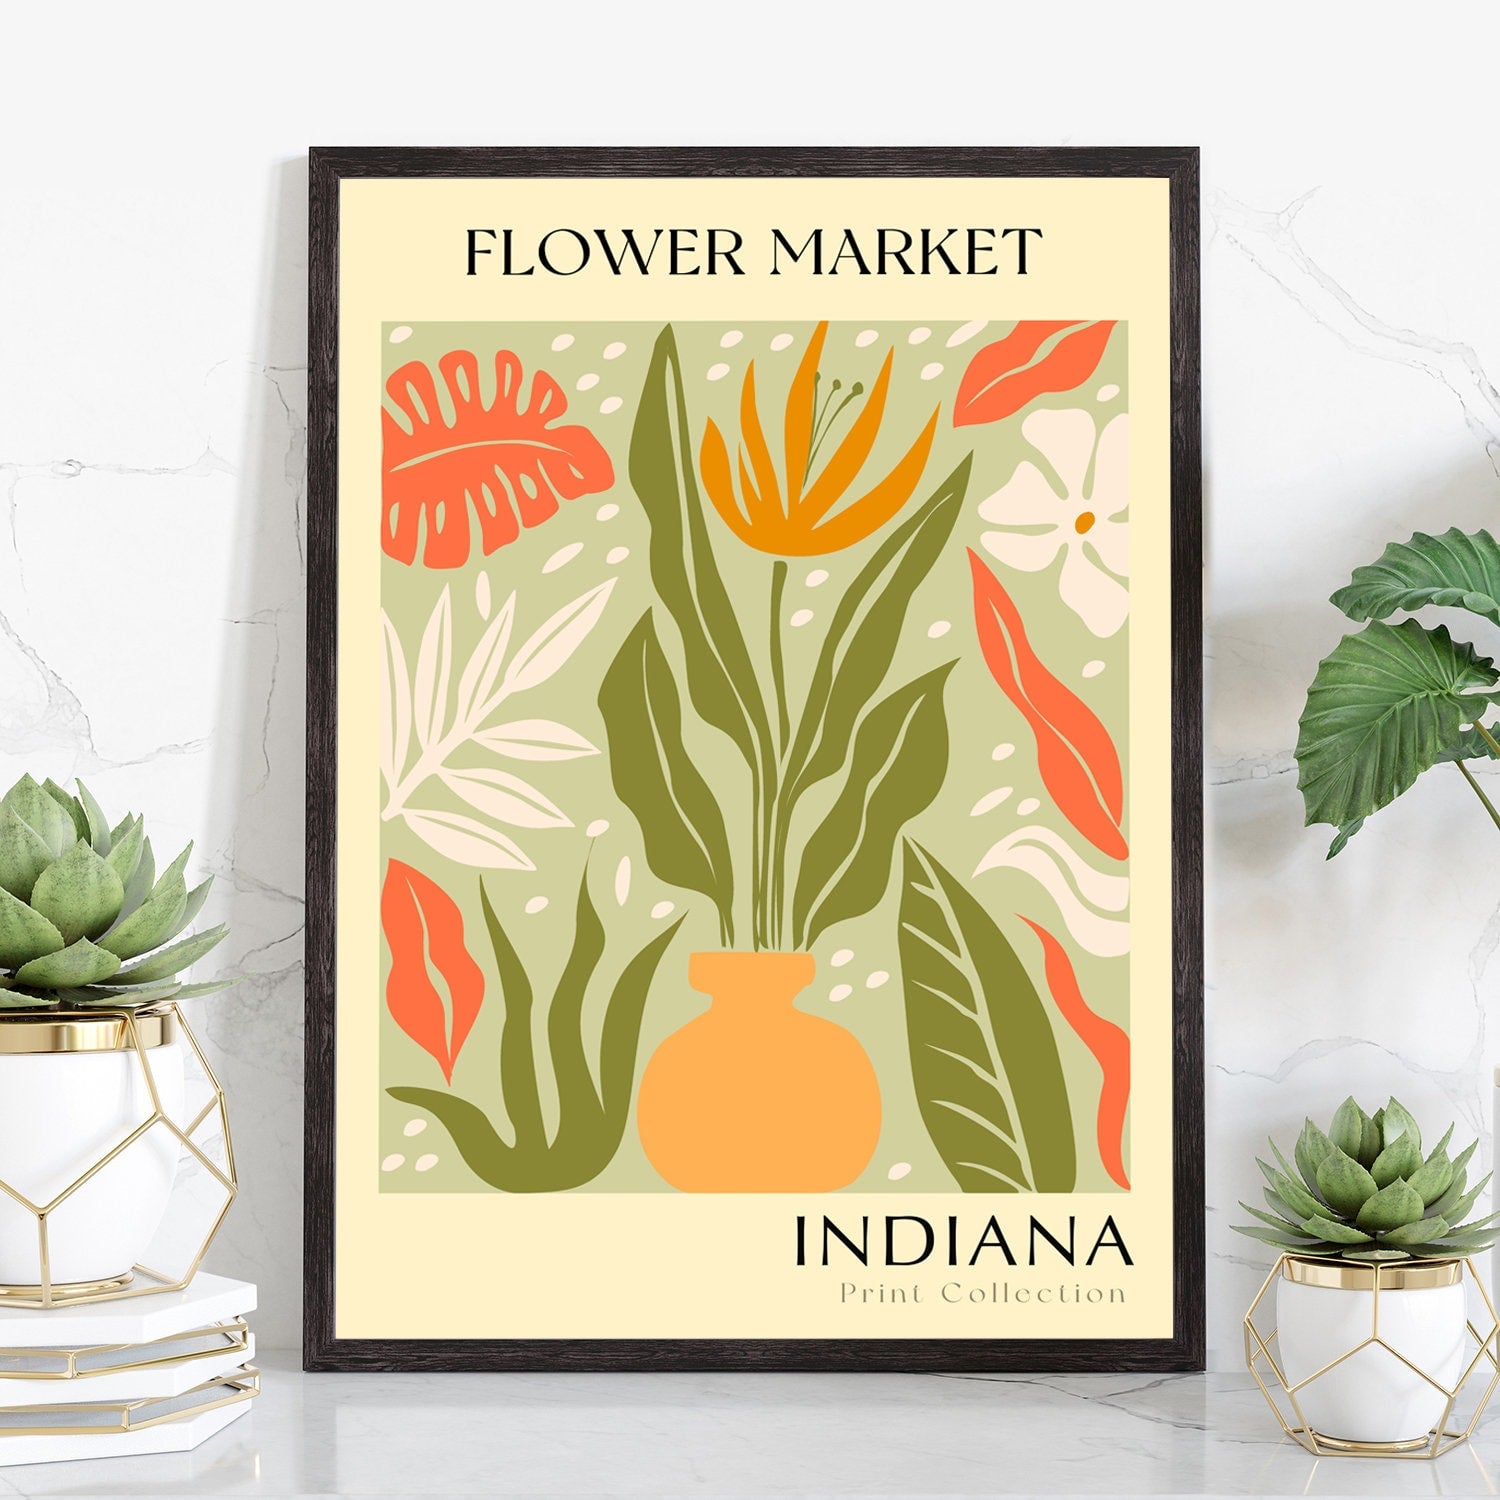 Indiana State flower print, USA states poster, Indiana flower market poster, Botanical posters, Nature poster artwork, Boho floral wall art